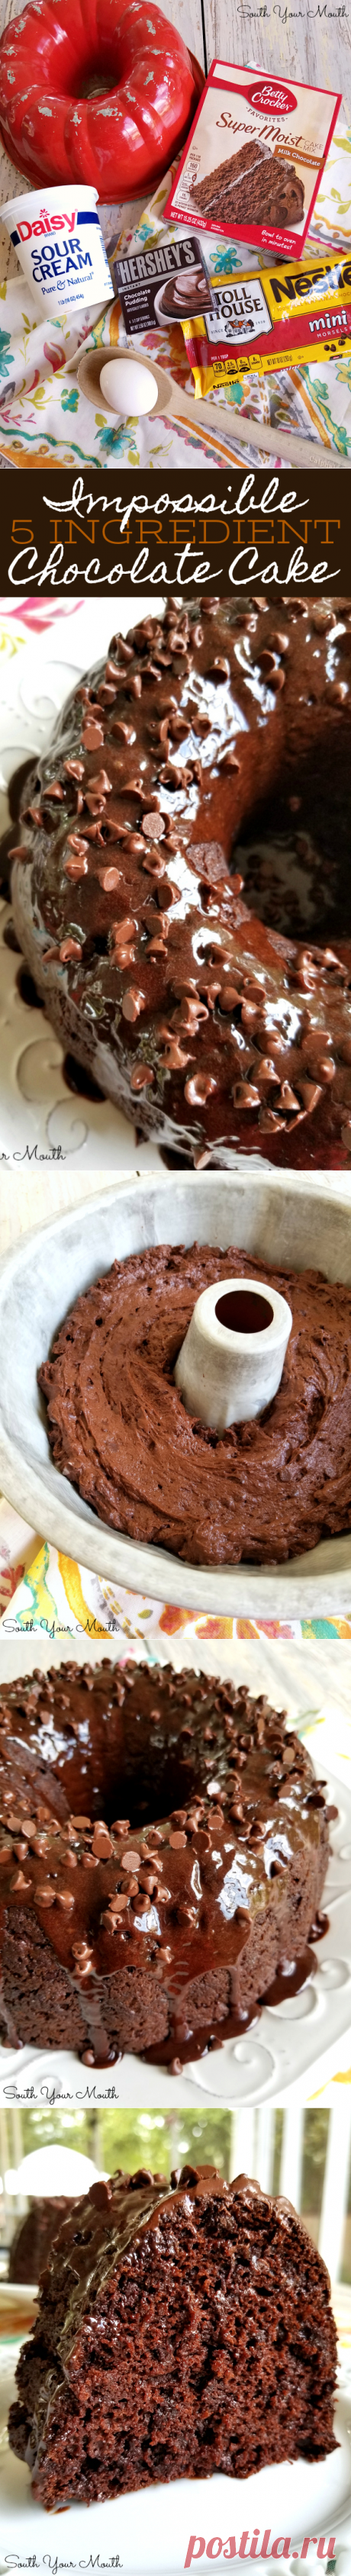 South Your Mouth: Impossible 5-Ingredient Chocolate Cake